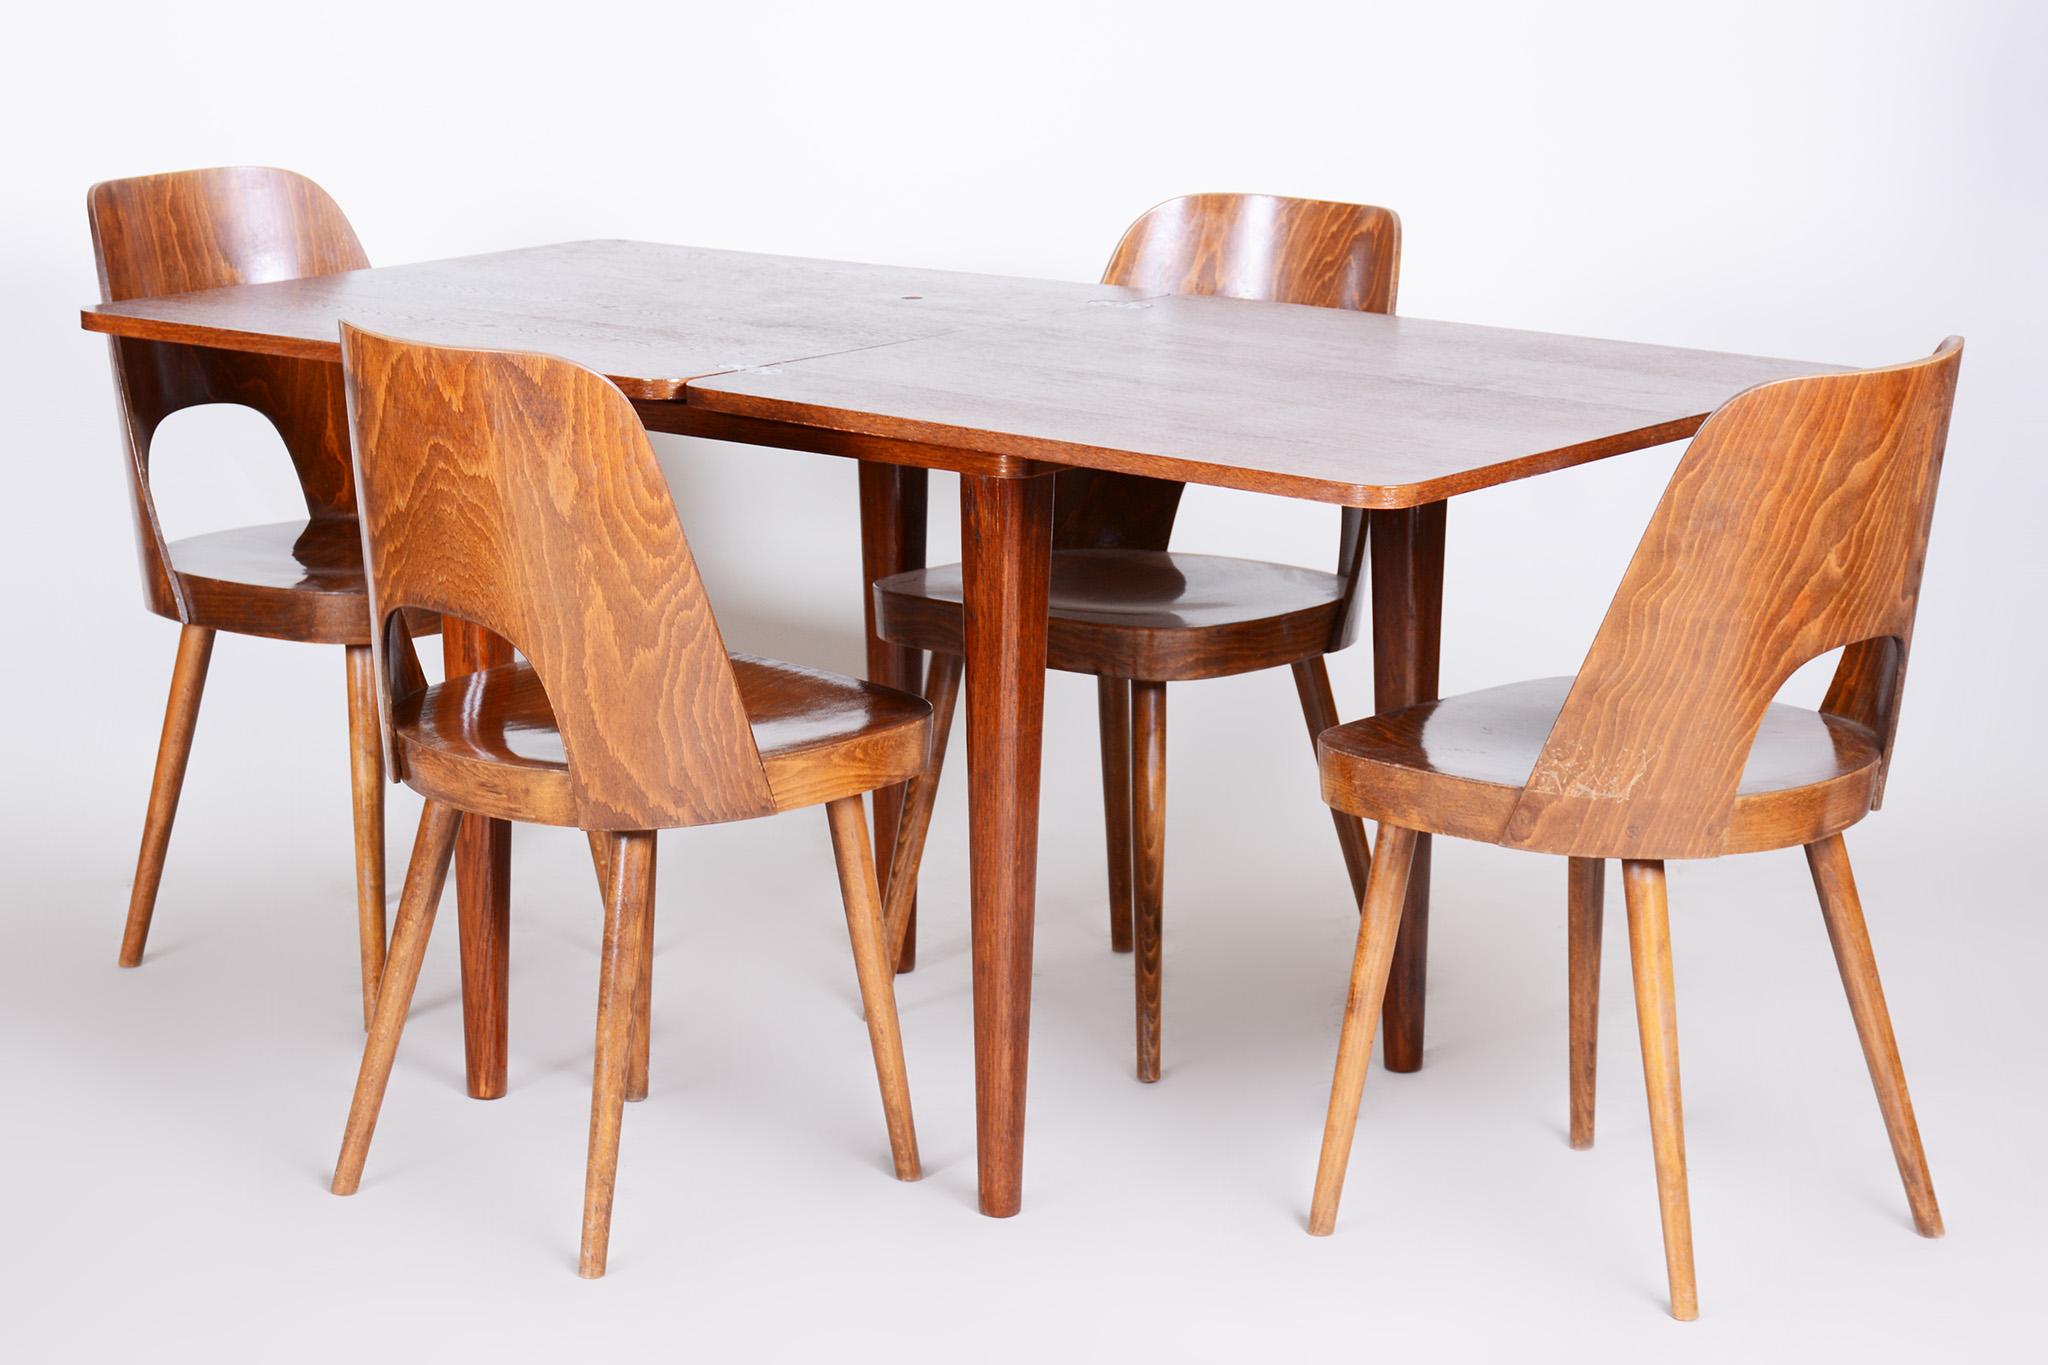 Small Folding Dining Table Made in 1940s Czechia, Designed by Halabala 4